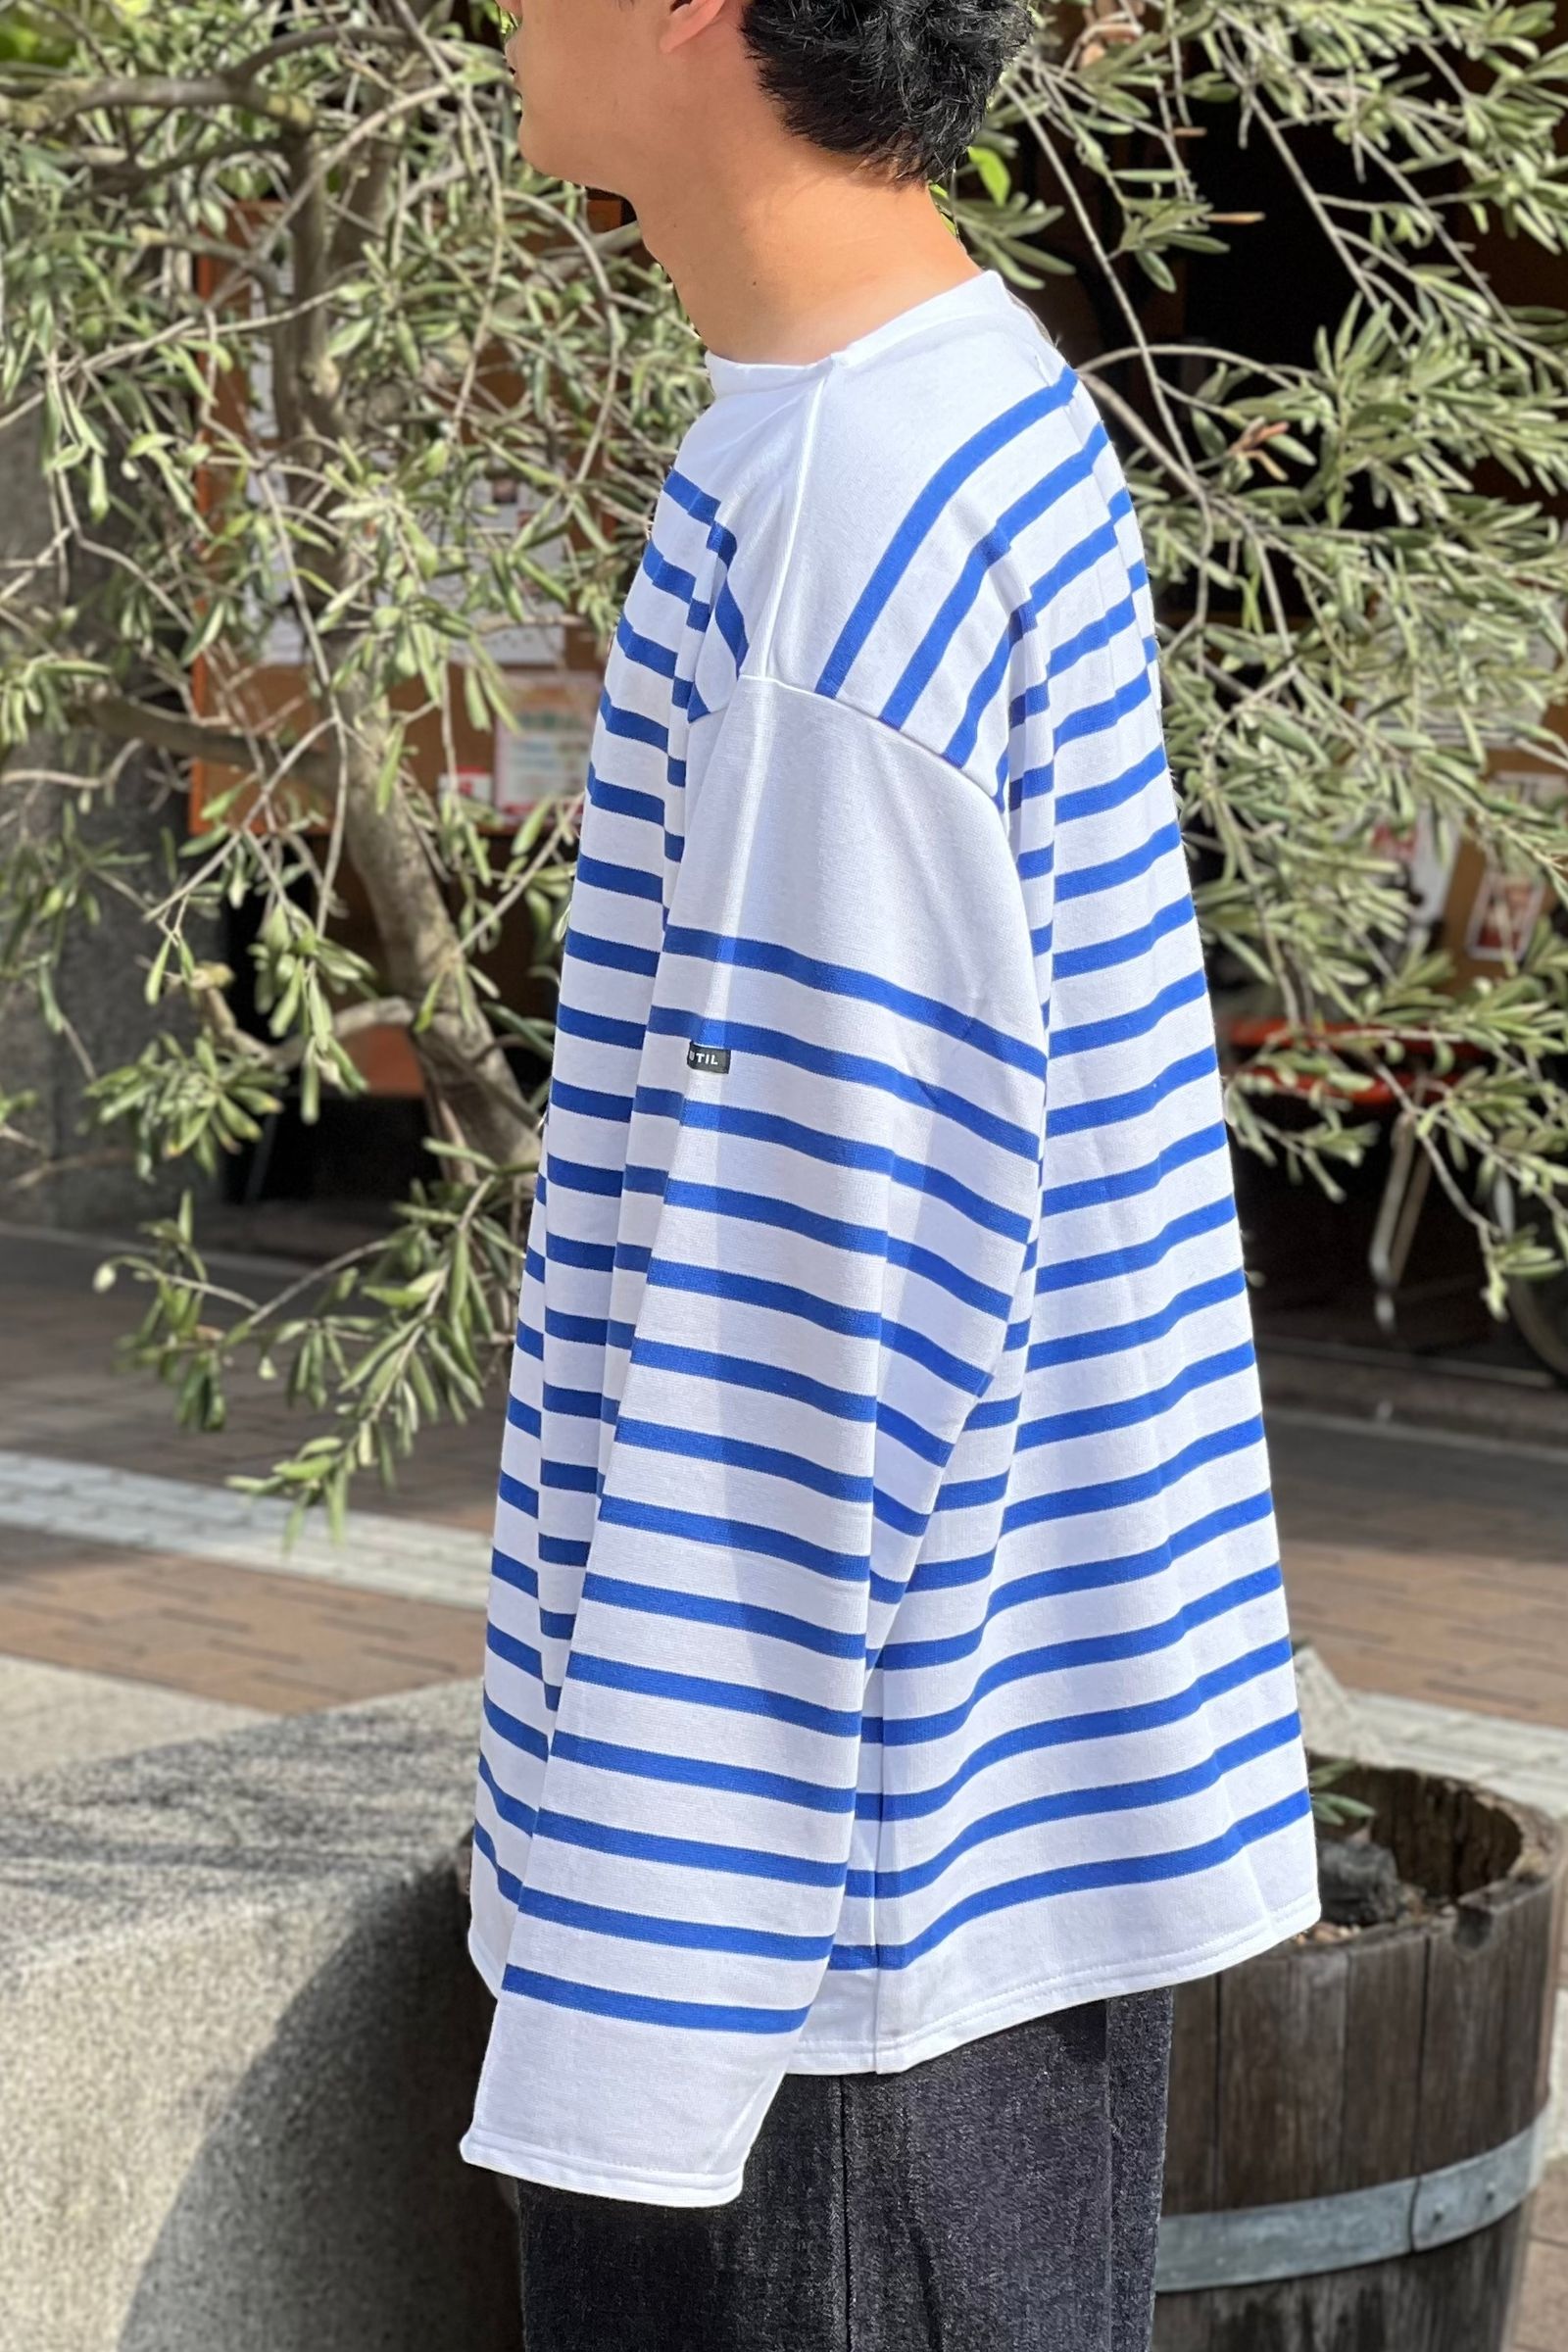 OUTIL - バスクシャツ/tricot aast ラッセル編み -white/blue - 22aw 